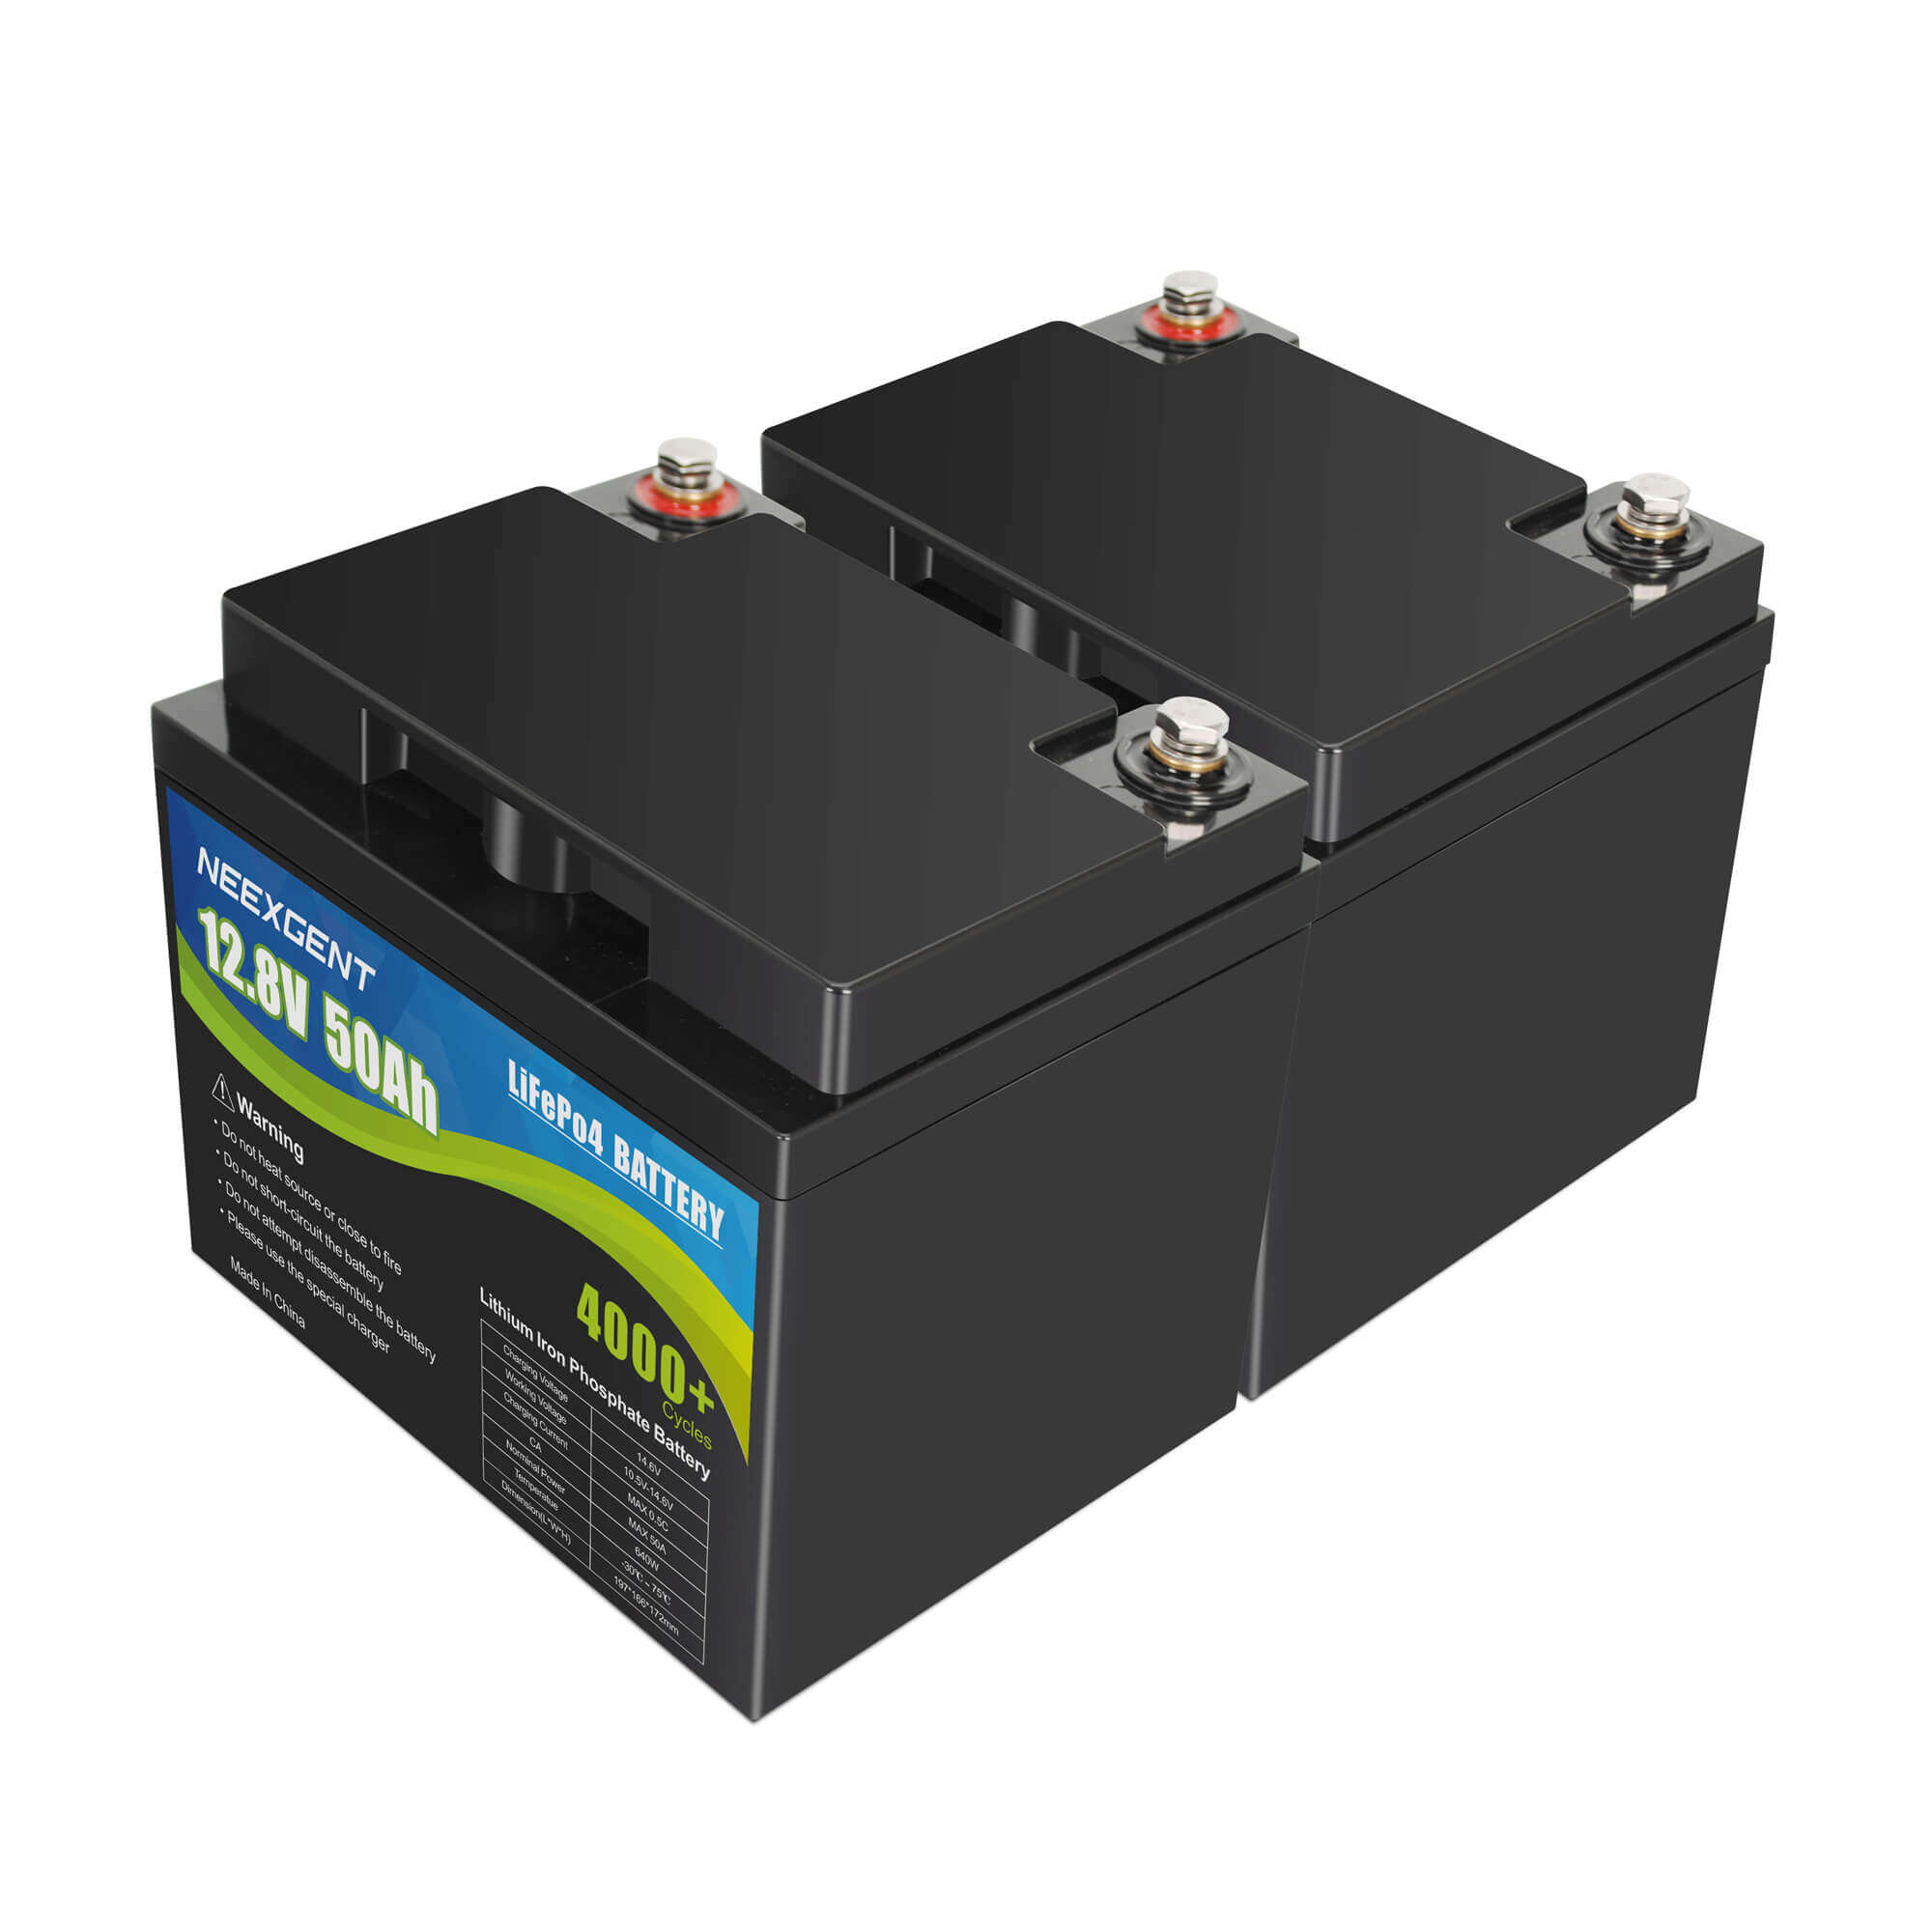 lithium-ion battery packs for electric vehicles